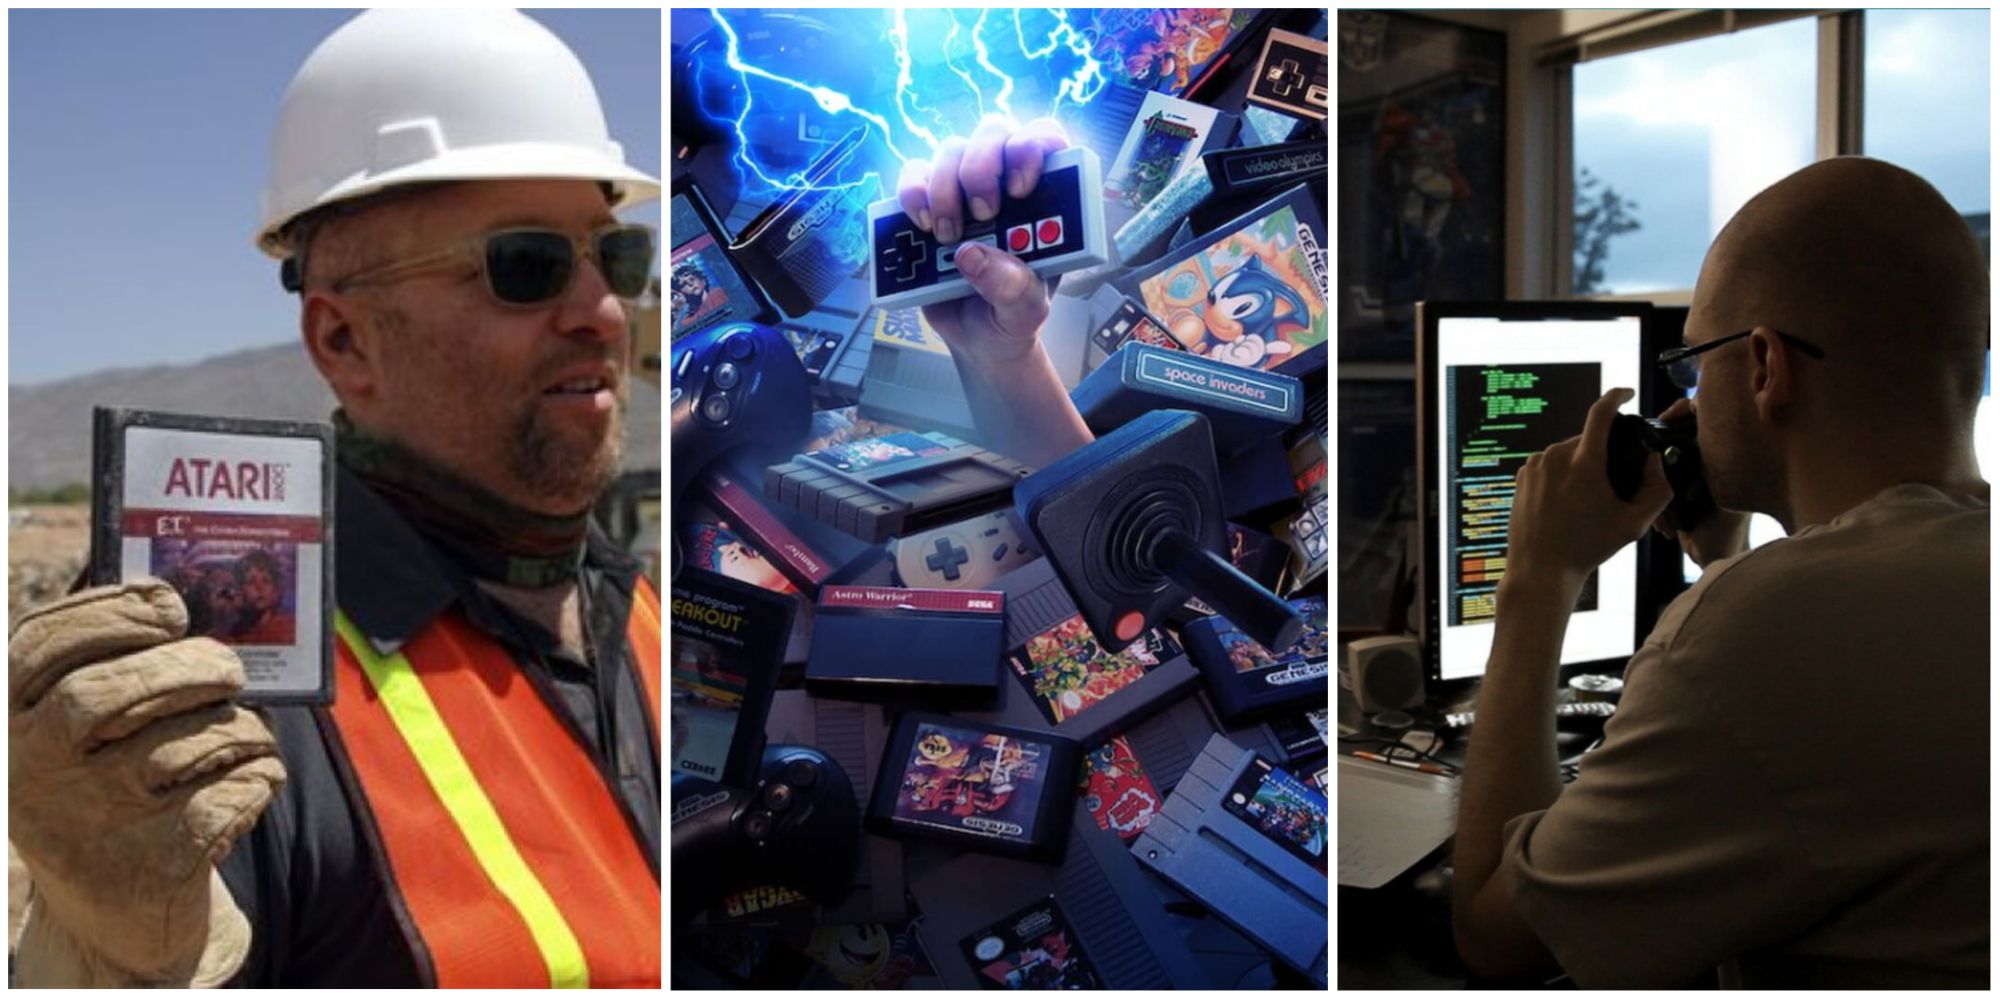 split image of man holding ET cart at construction site, NES controller games promo, man working at station